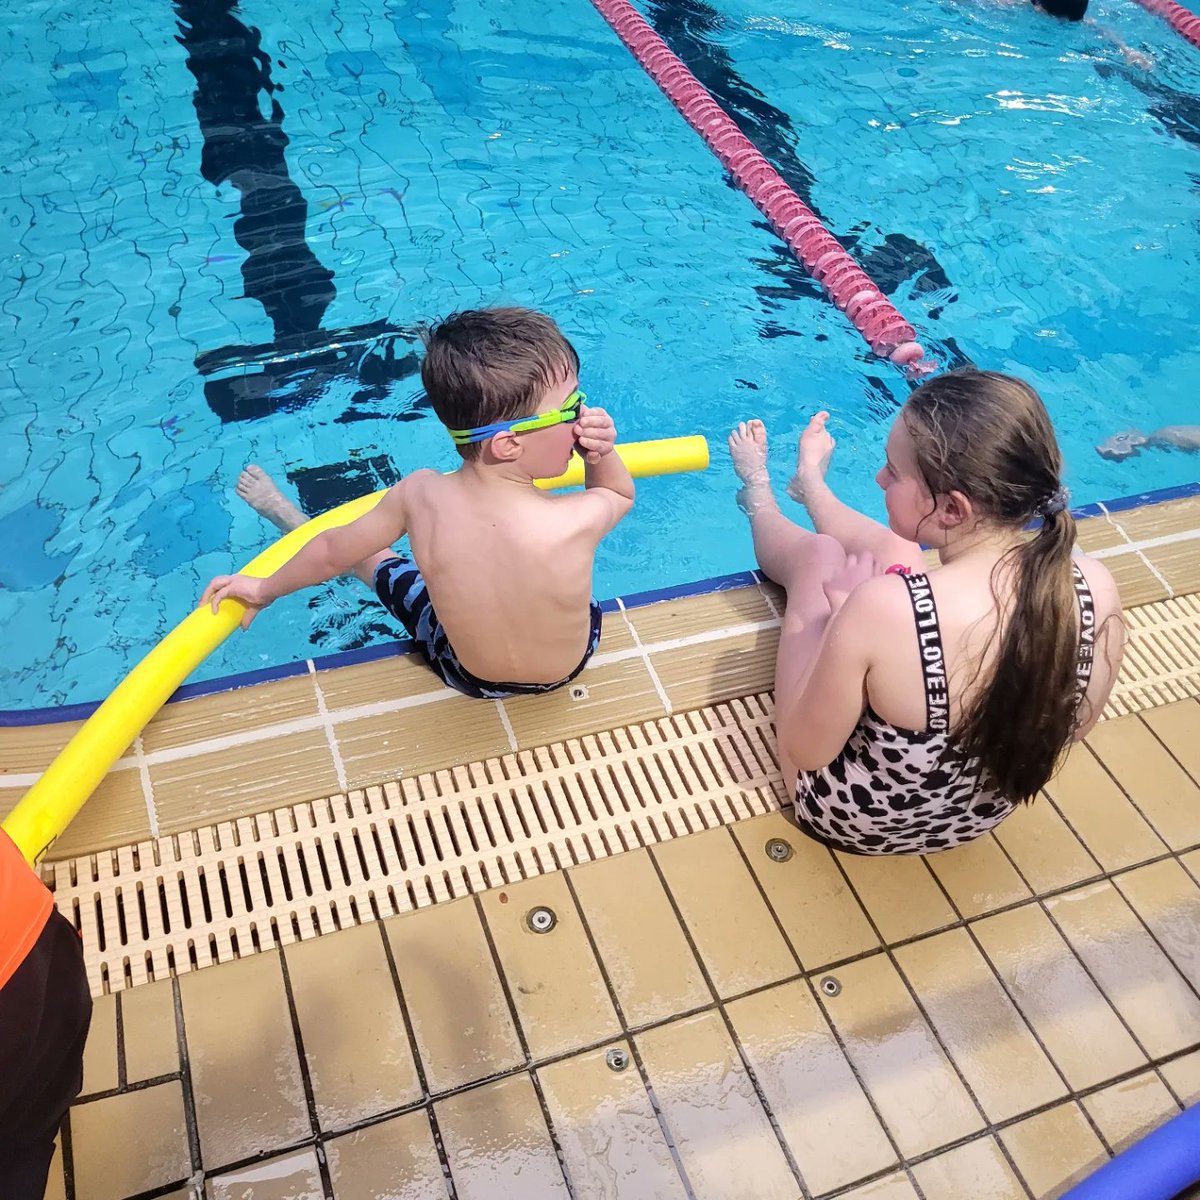 Ezra did his first 🏊‍♂️ swimming marathon today with Lytham St Anne's Lions club. Nevaeh Stepped in to help out the team at the last min 👏 They both did great and helped to raise loads of money for charity👏